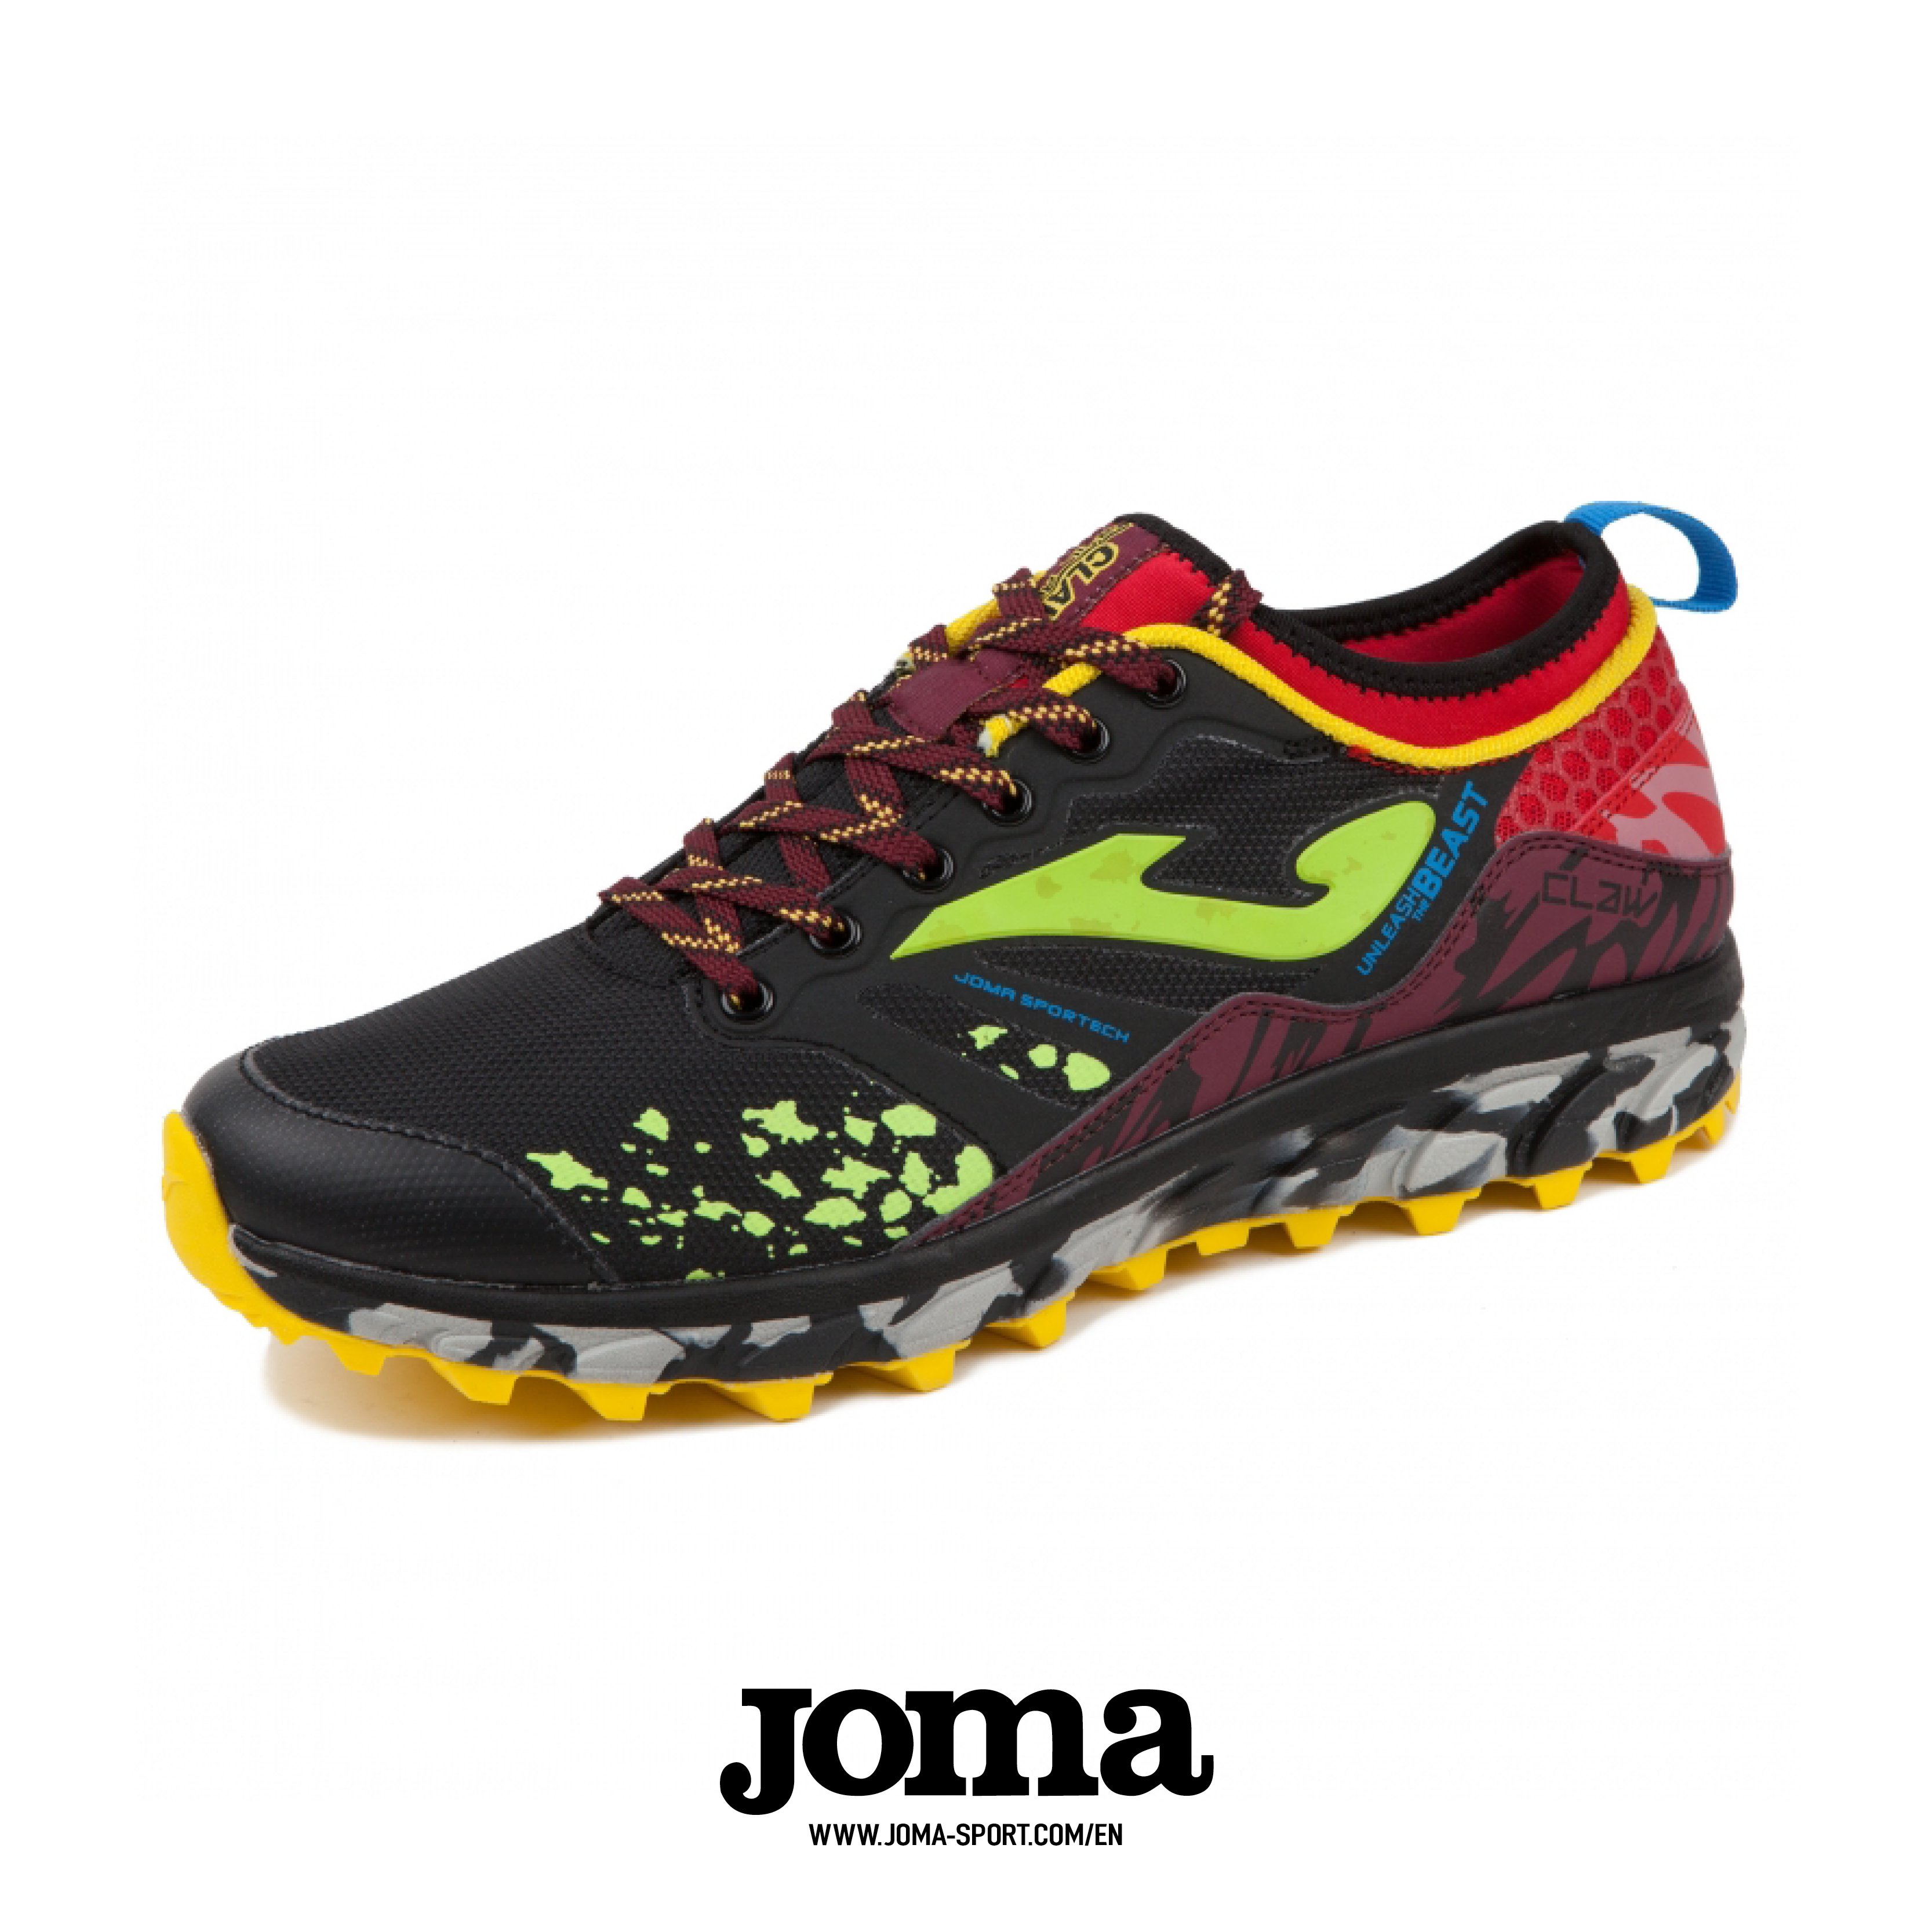 jefe Illinois marcador Joma Sport UK on Twitter: "Joma presents the new Claw trek shoes. Available  in mens and women styles and a variety of different colours. Contact your  local specialist for more details. #JomaUK